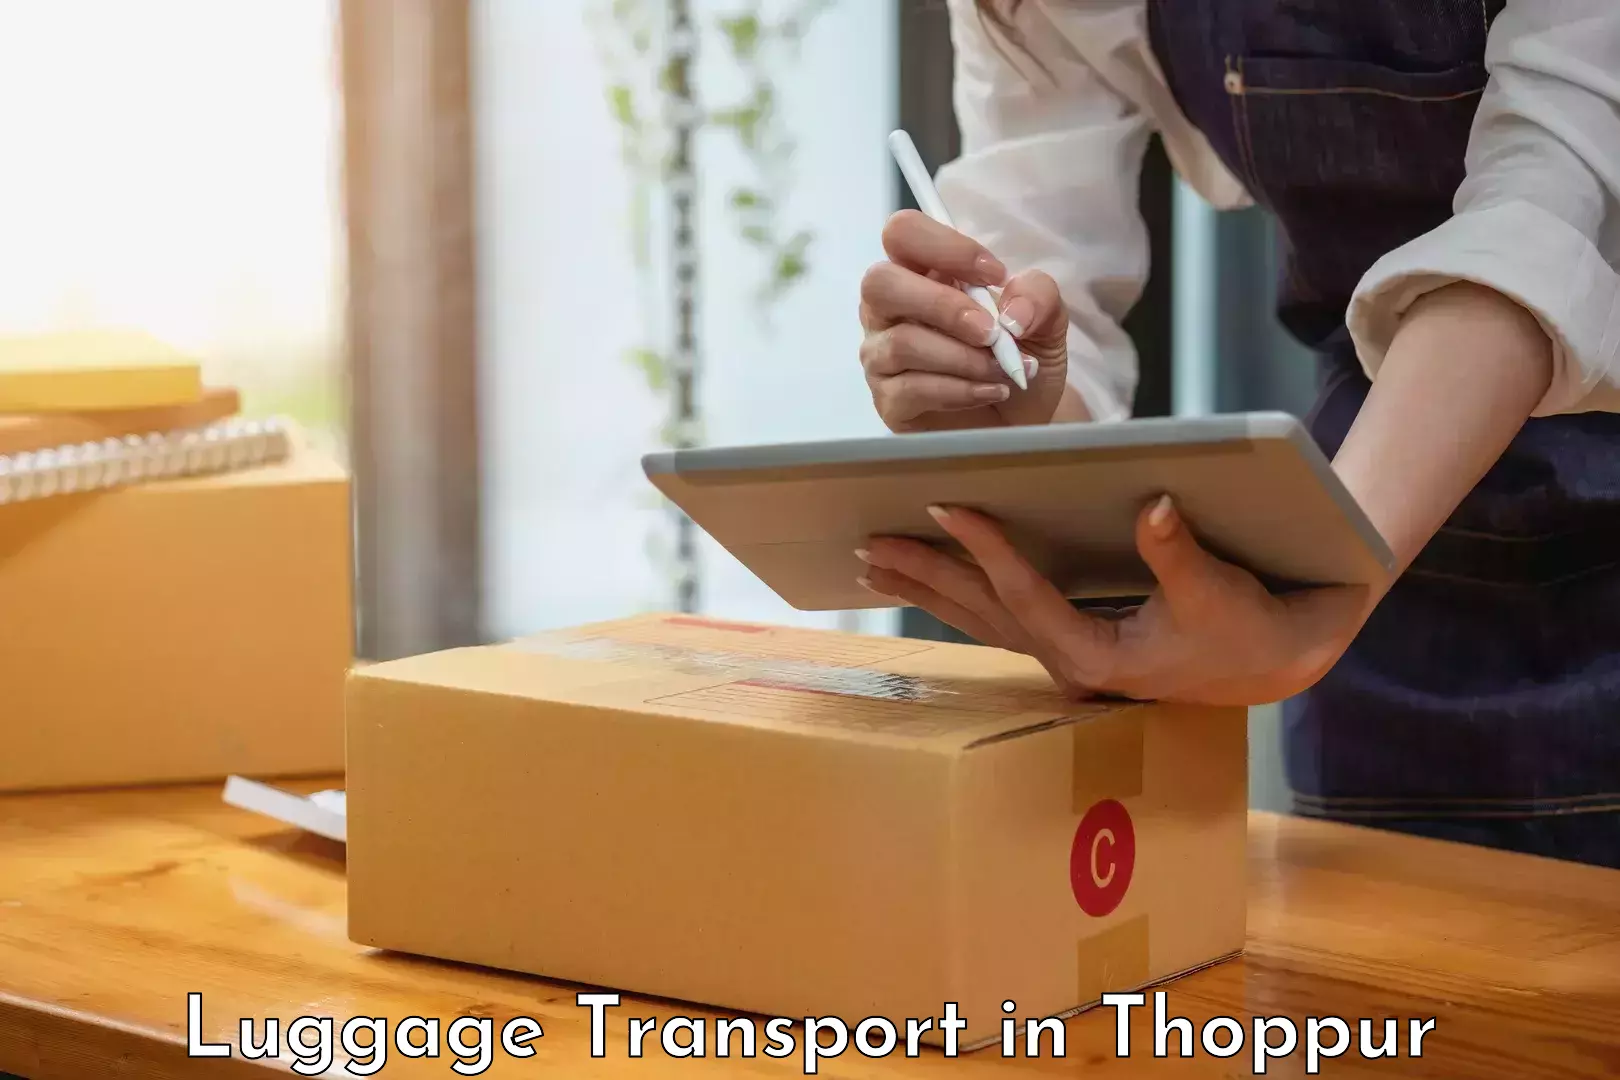 Luggage transfer service in Thoppur